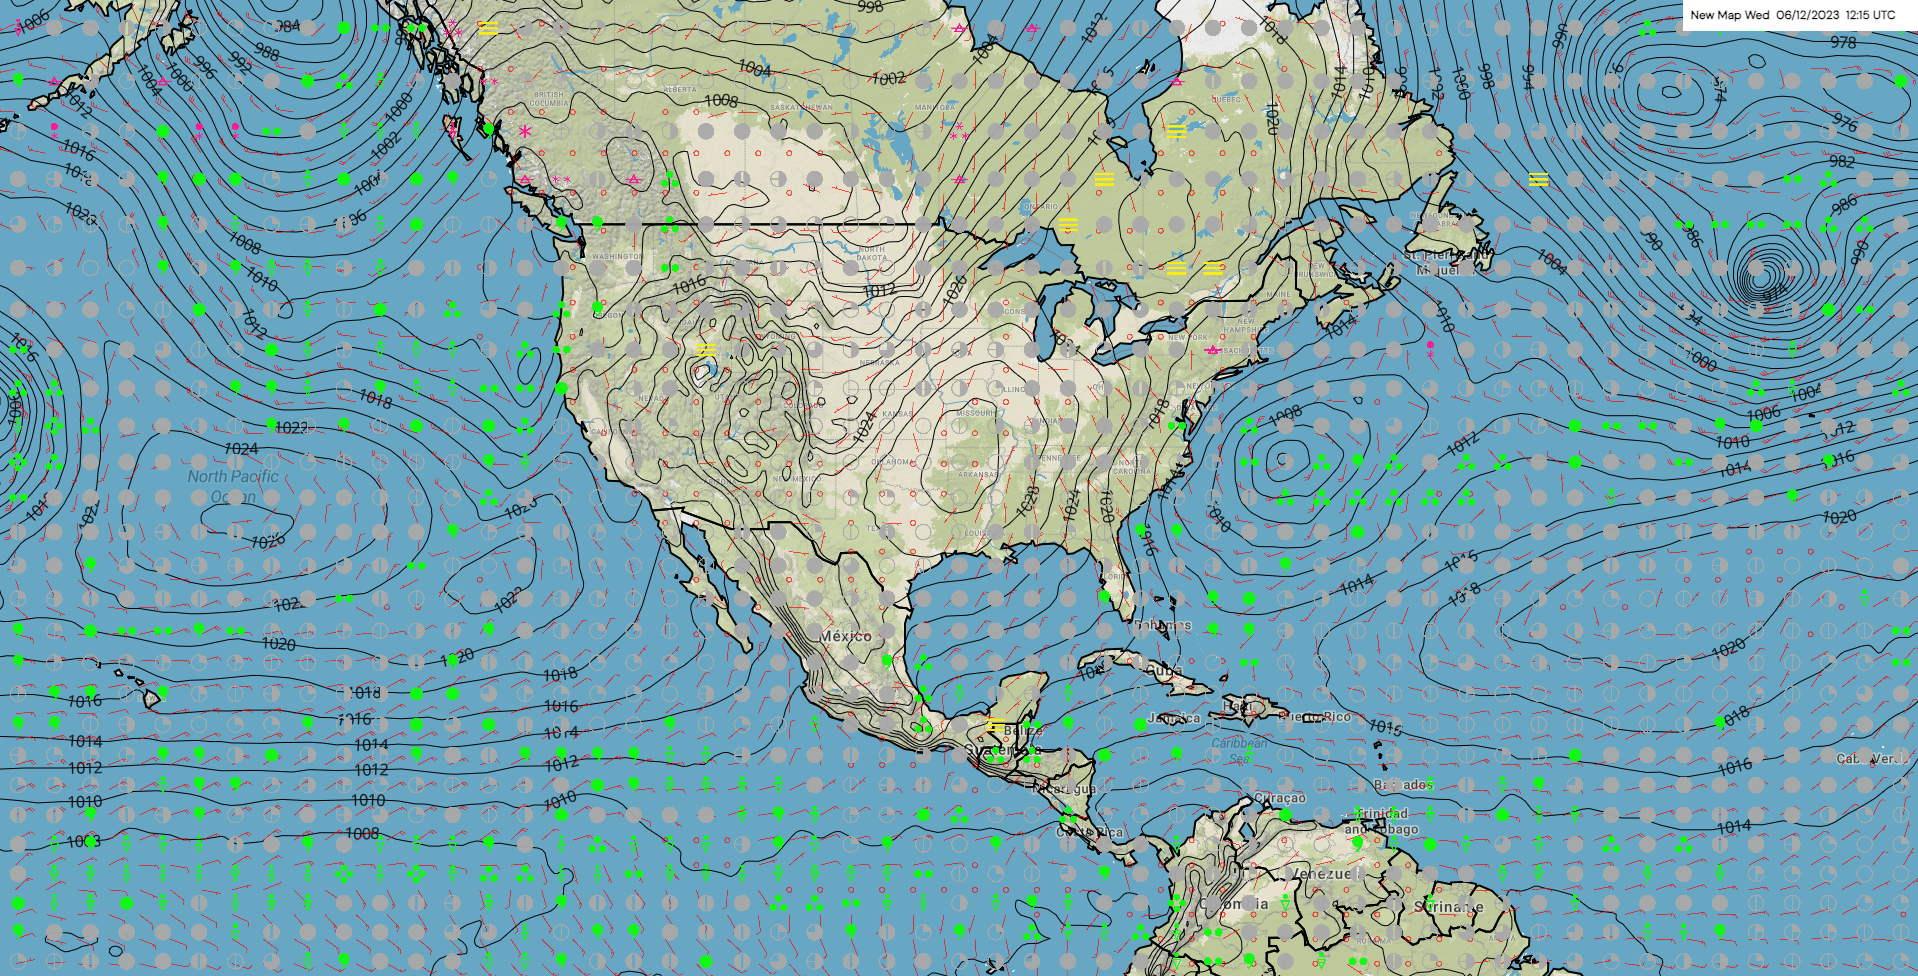 surface weather map